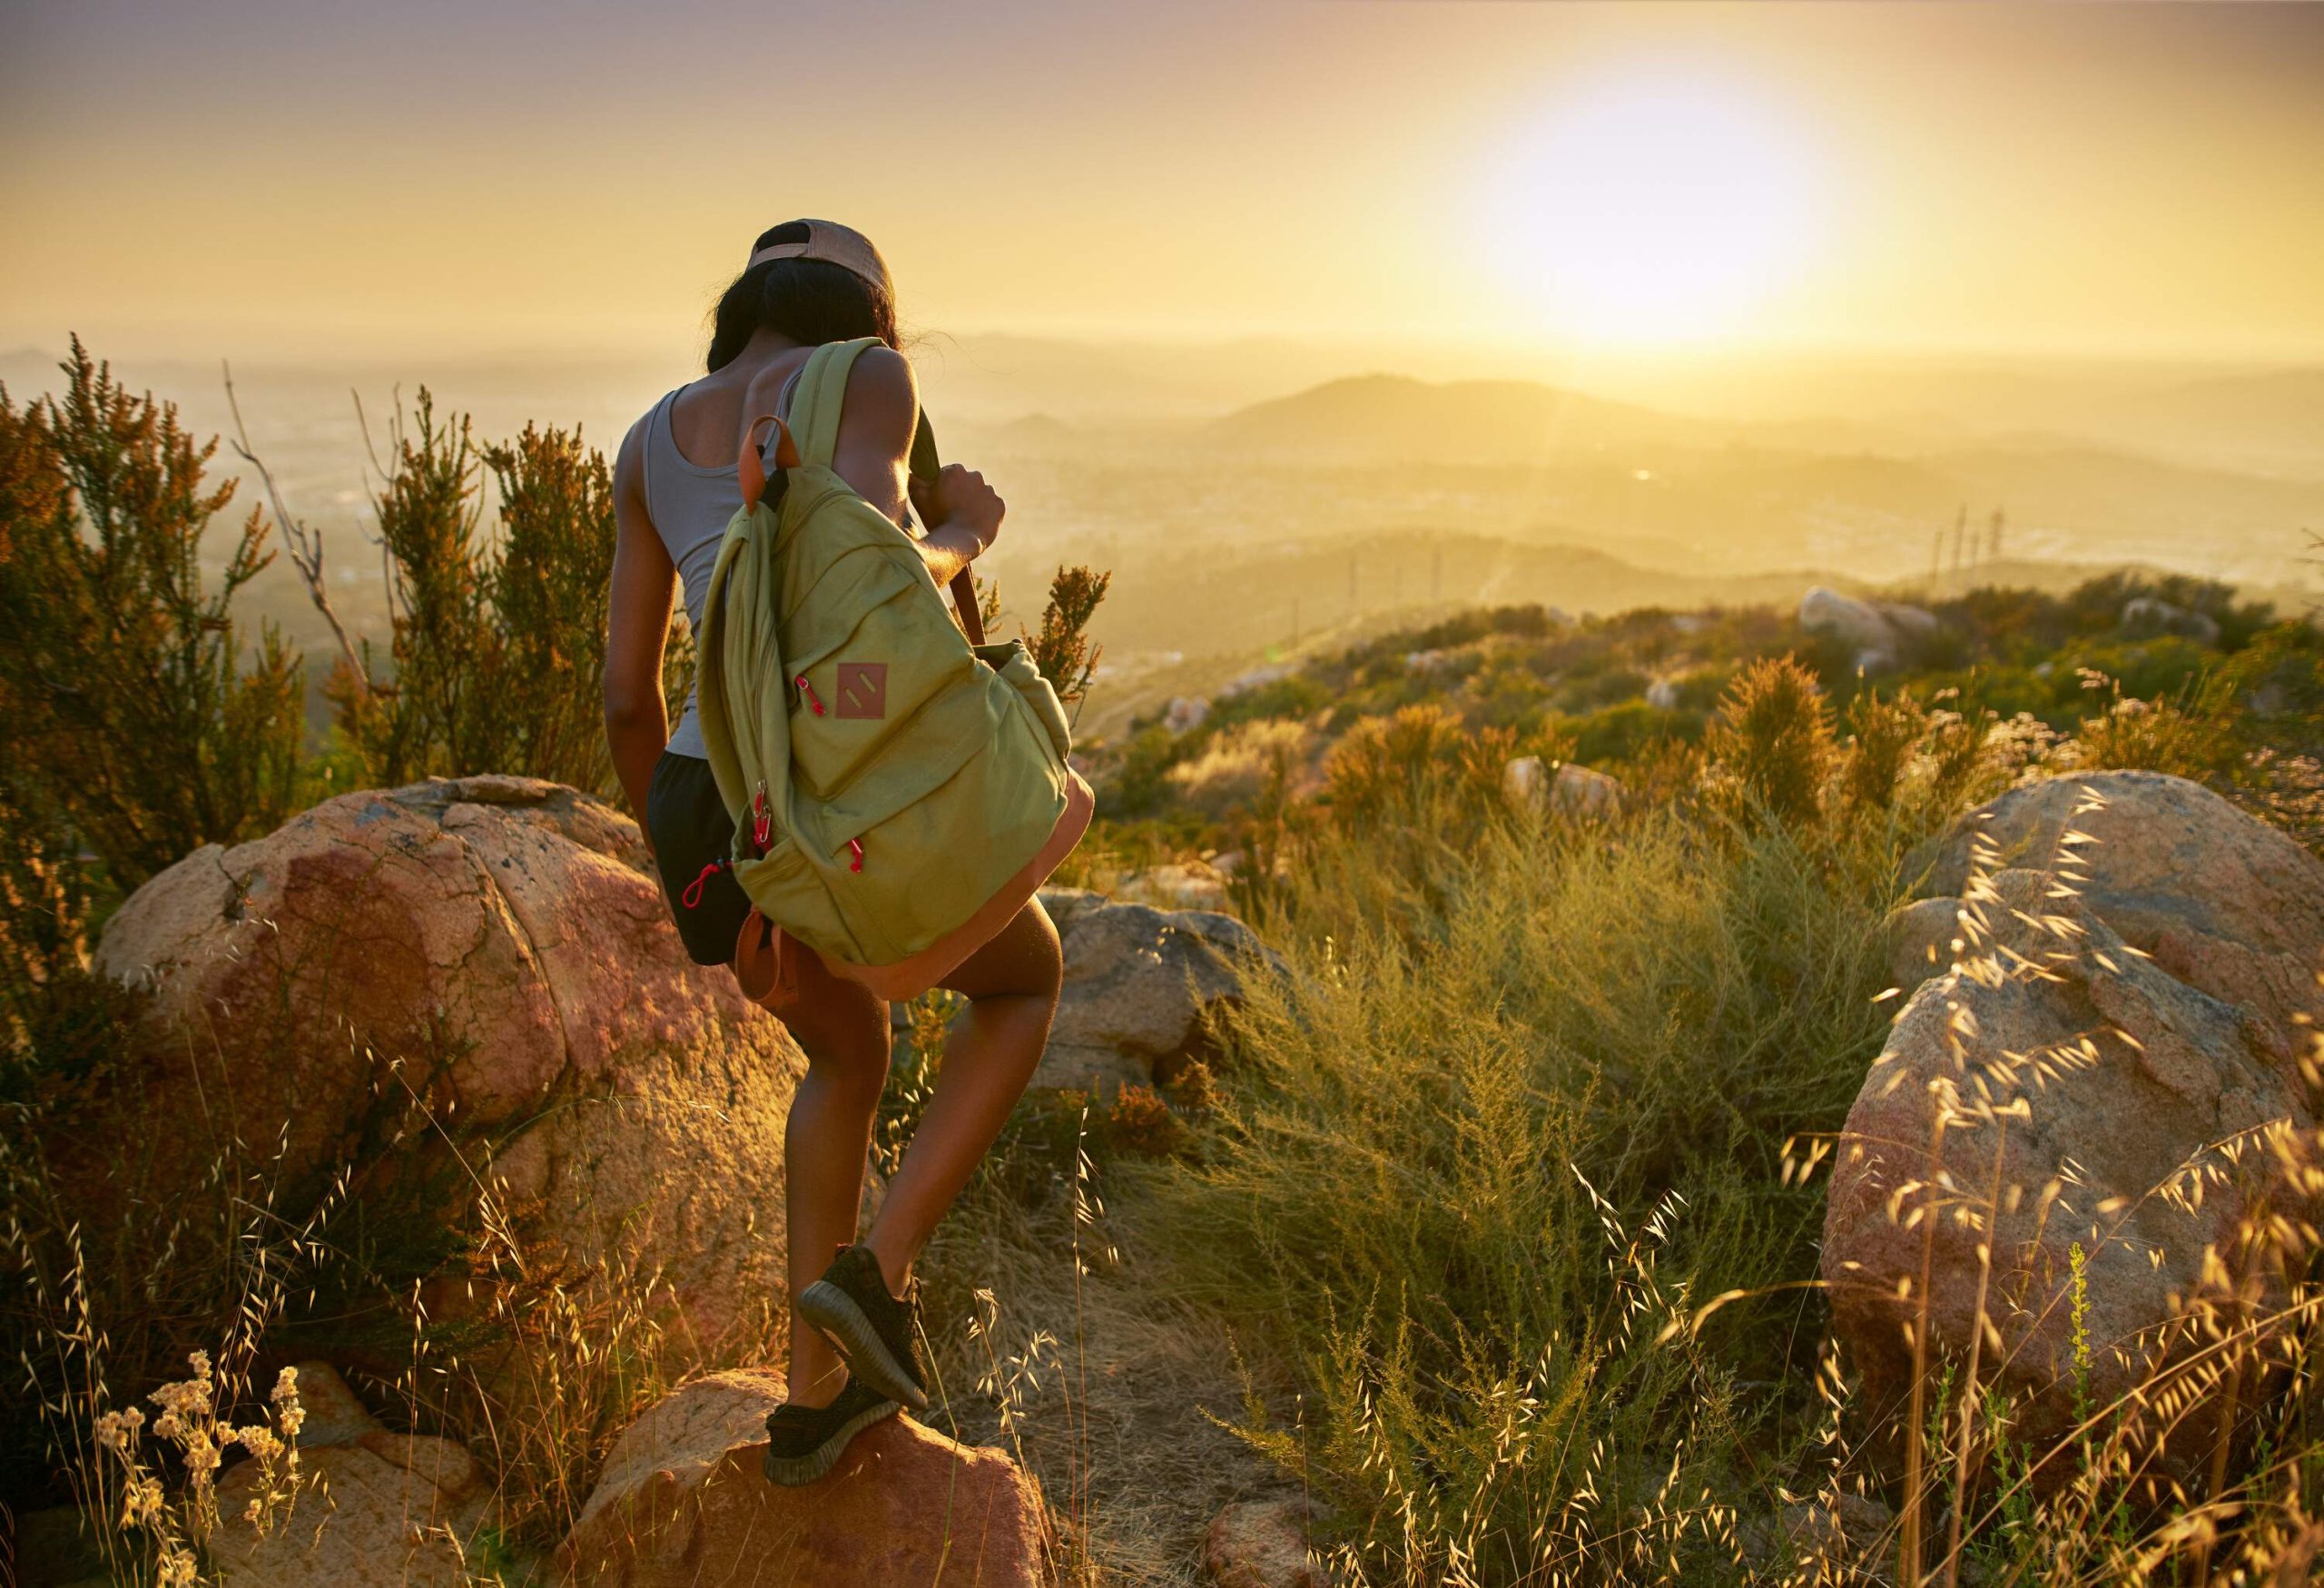 A female hiker with a green rucksack is walking along a rocky path watching the scorching sun over the mountains.